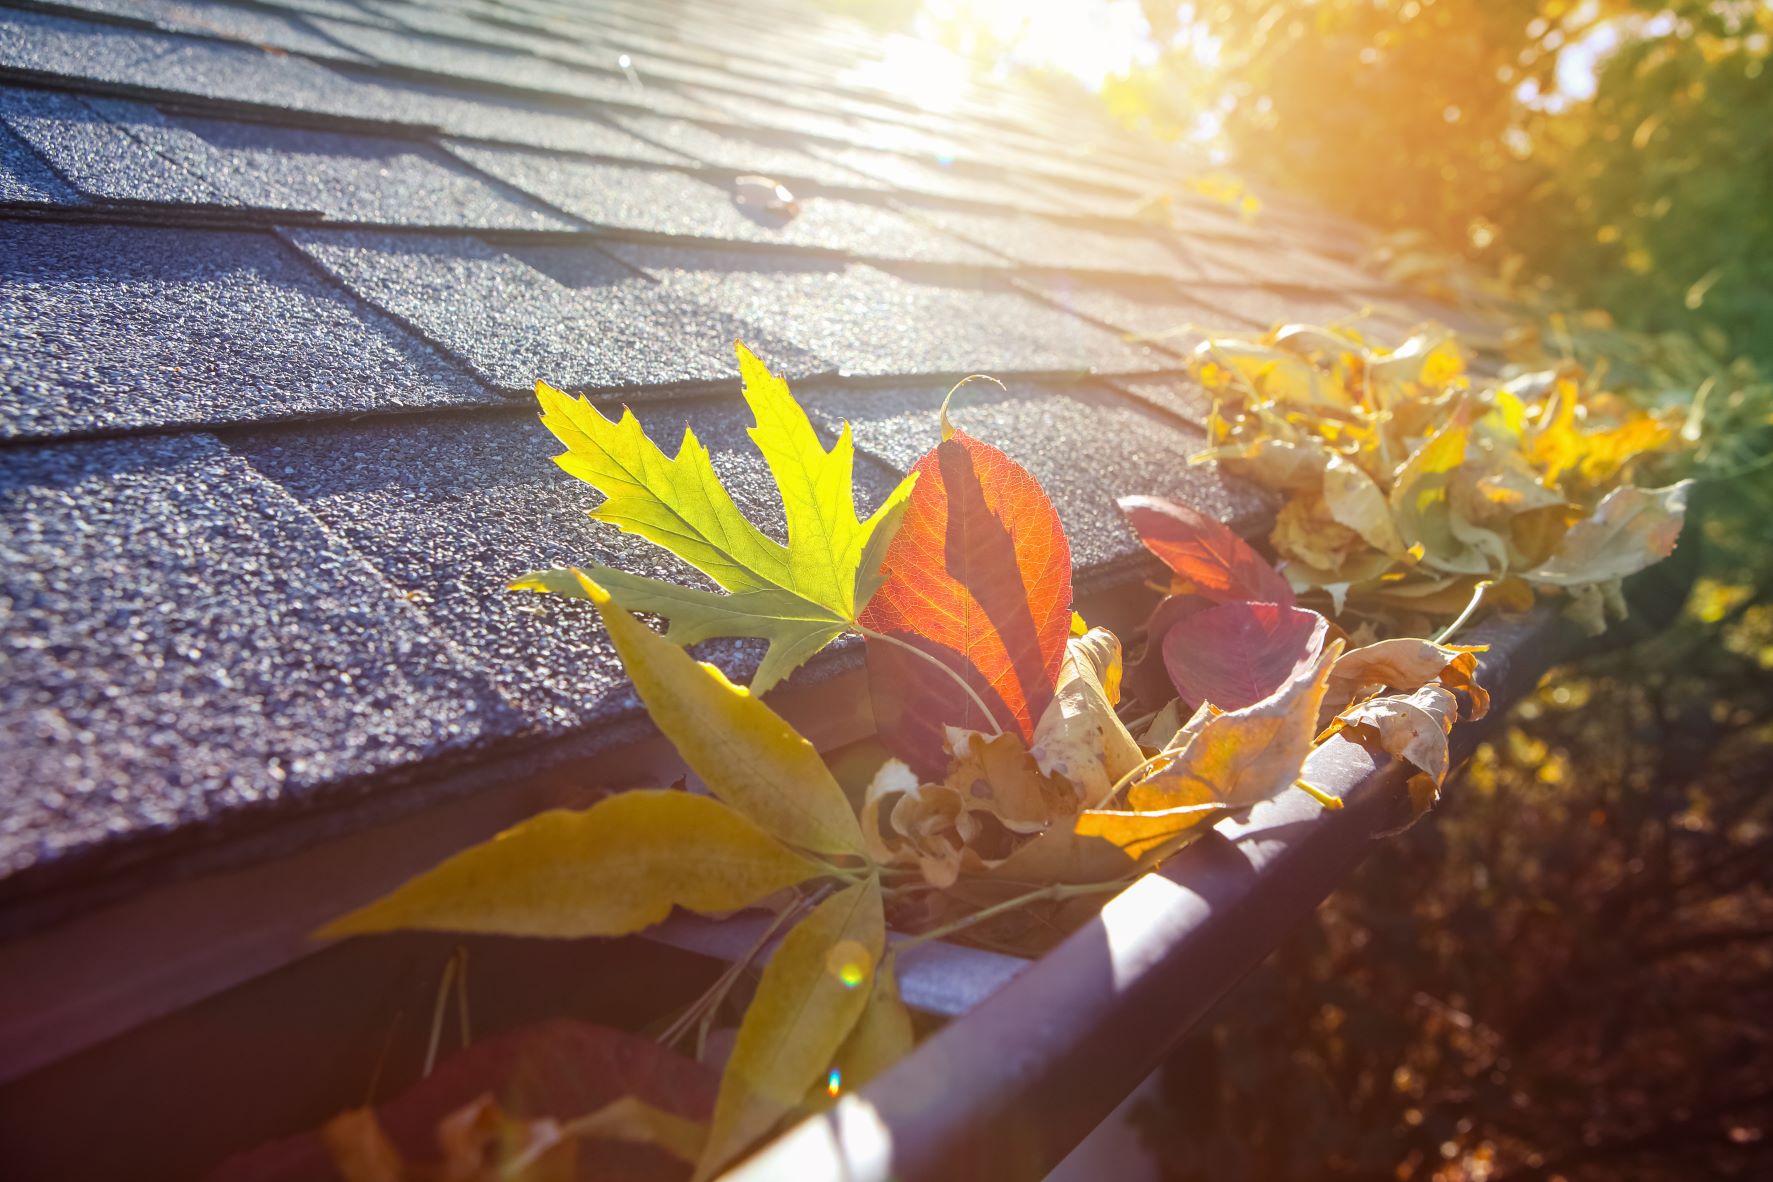 Gutters need cleaning at rental property